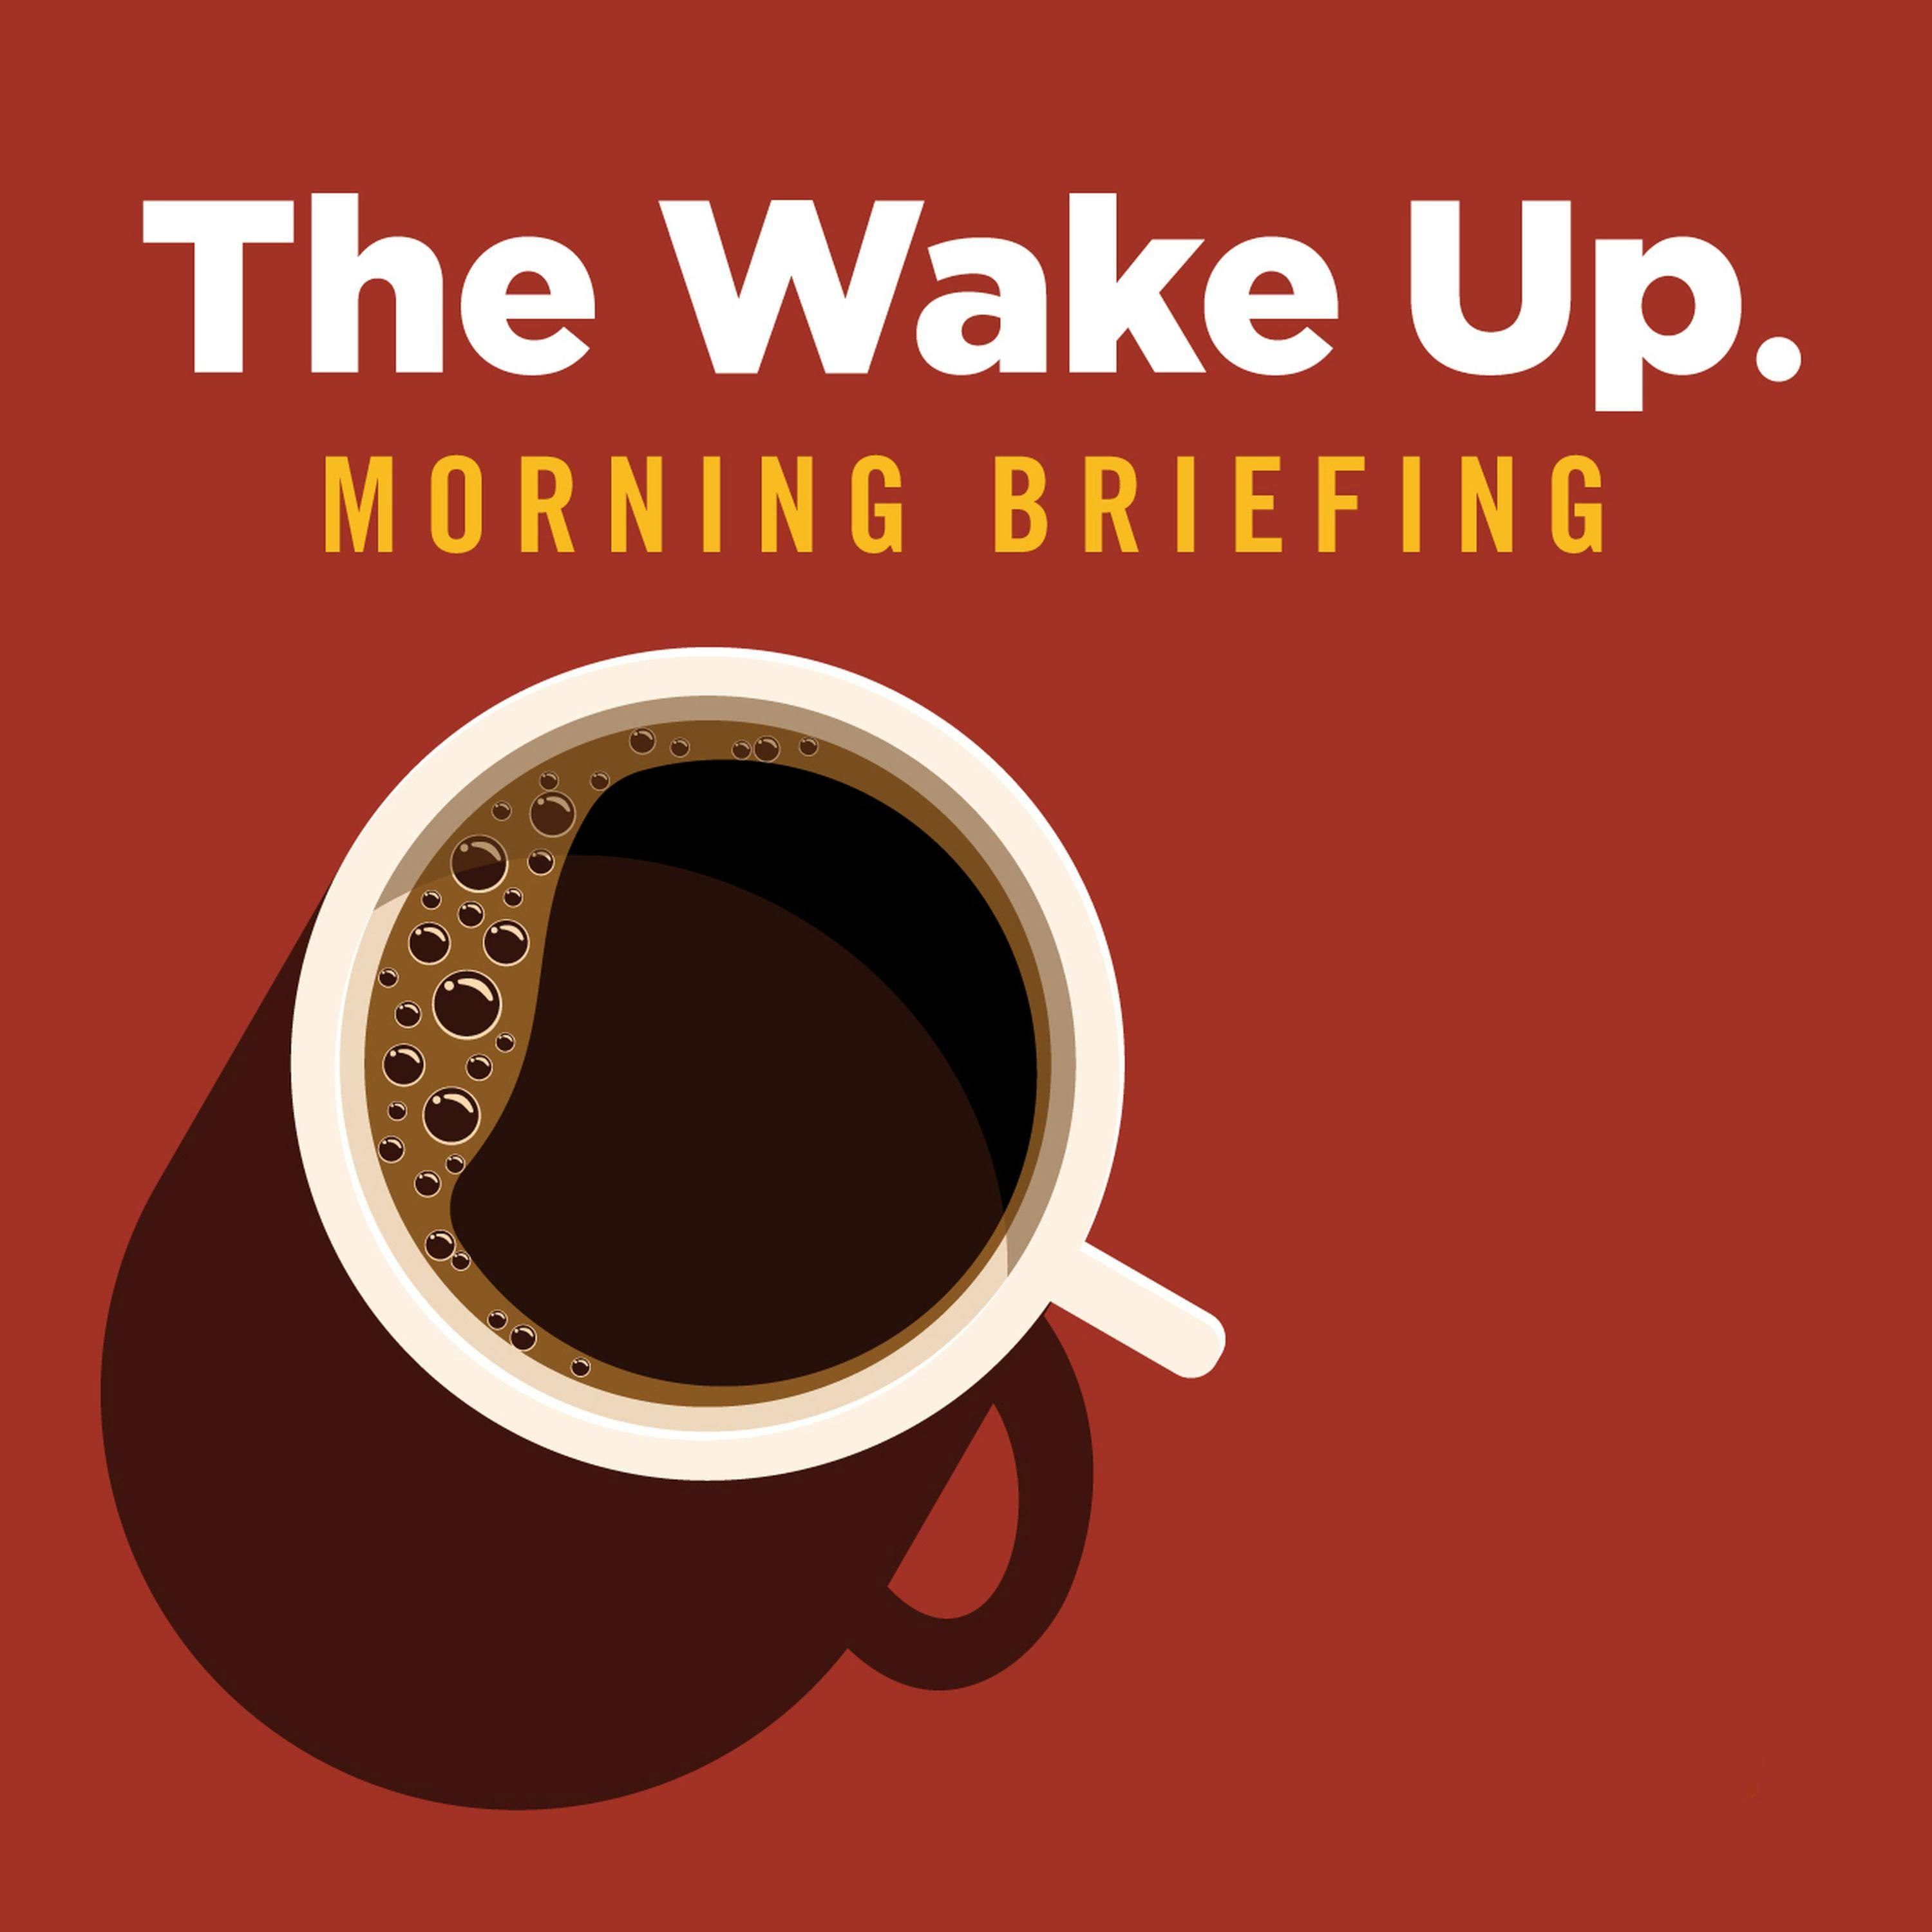 The Wake Up - July 17, 2020 - Questions about how Cuyahoga County picked lawyers and bankers for loan deal